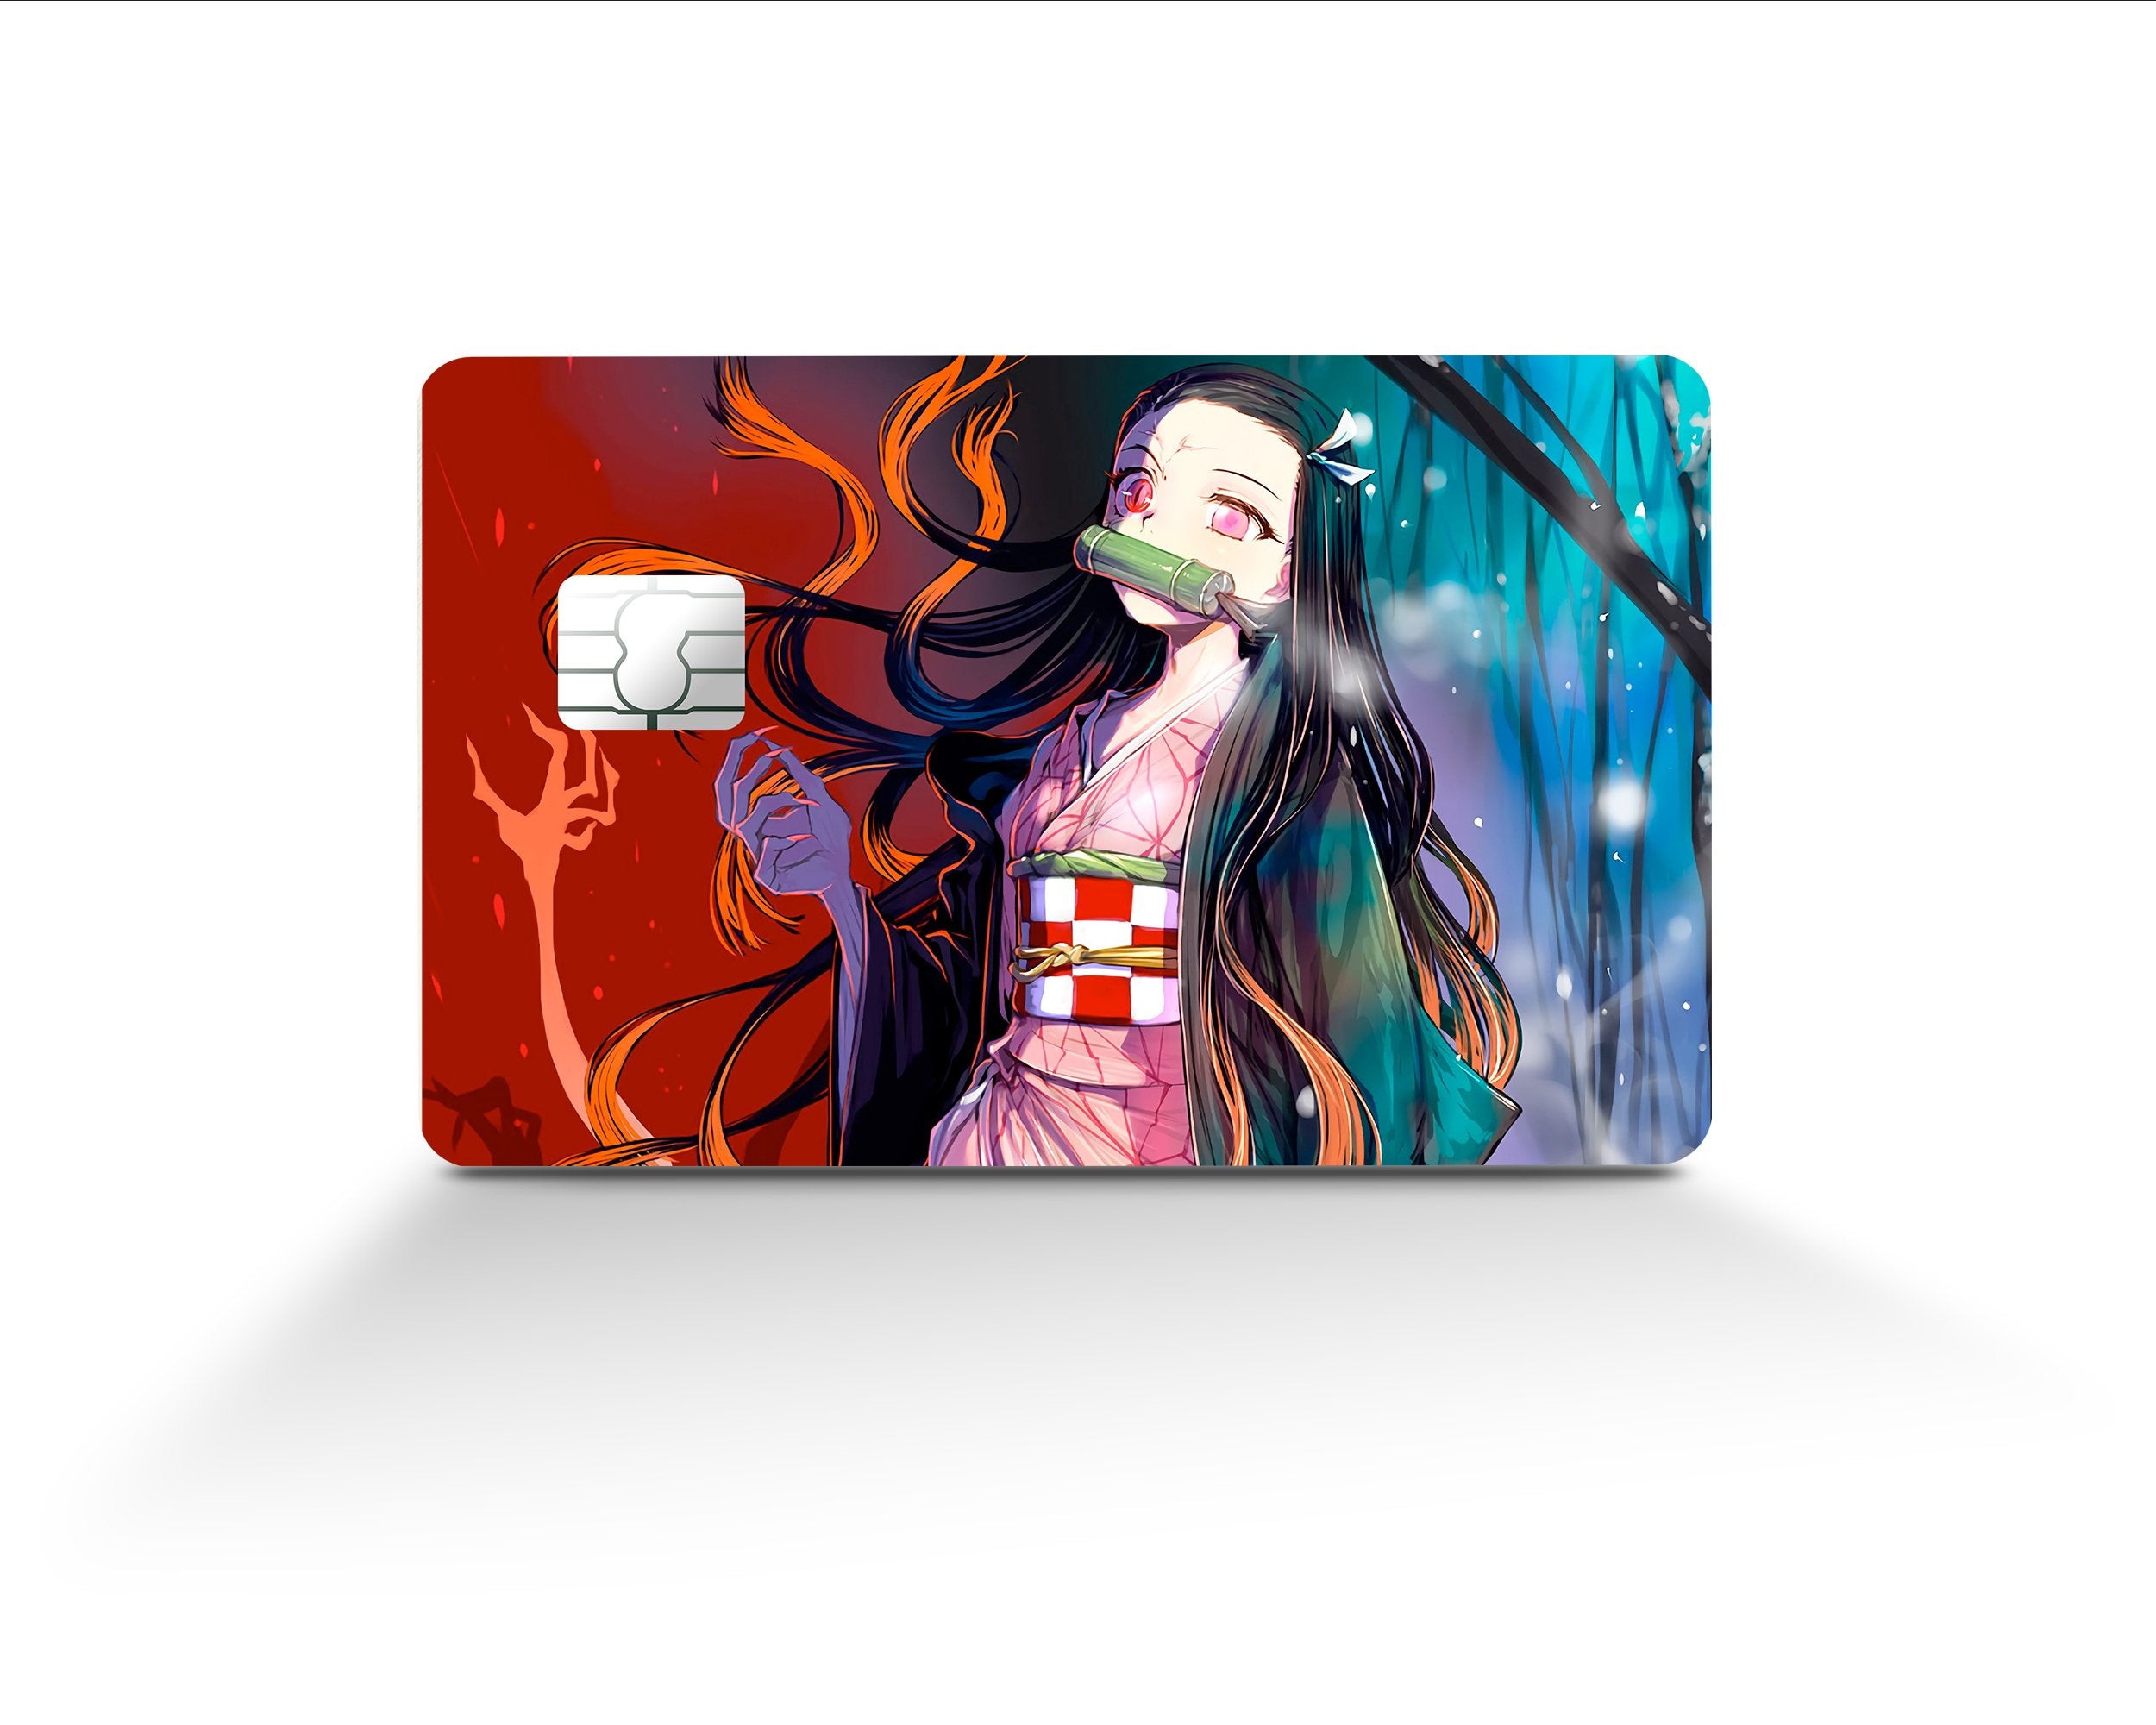 Anime fans rejoice - Visa launches Pokemon branded credit cards in Japan -  Luxurylaunches